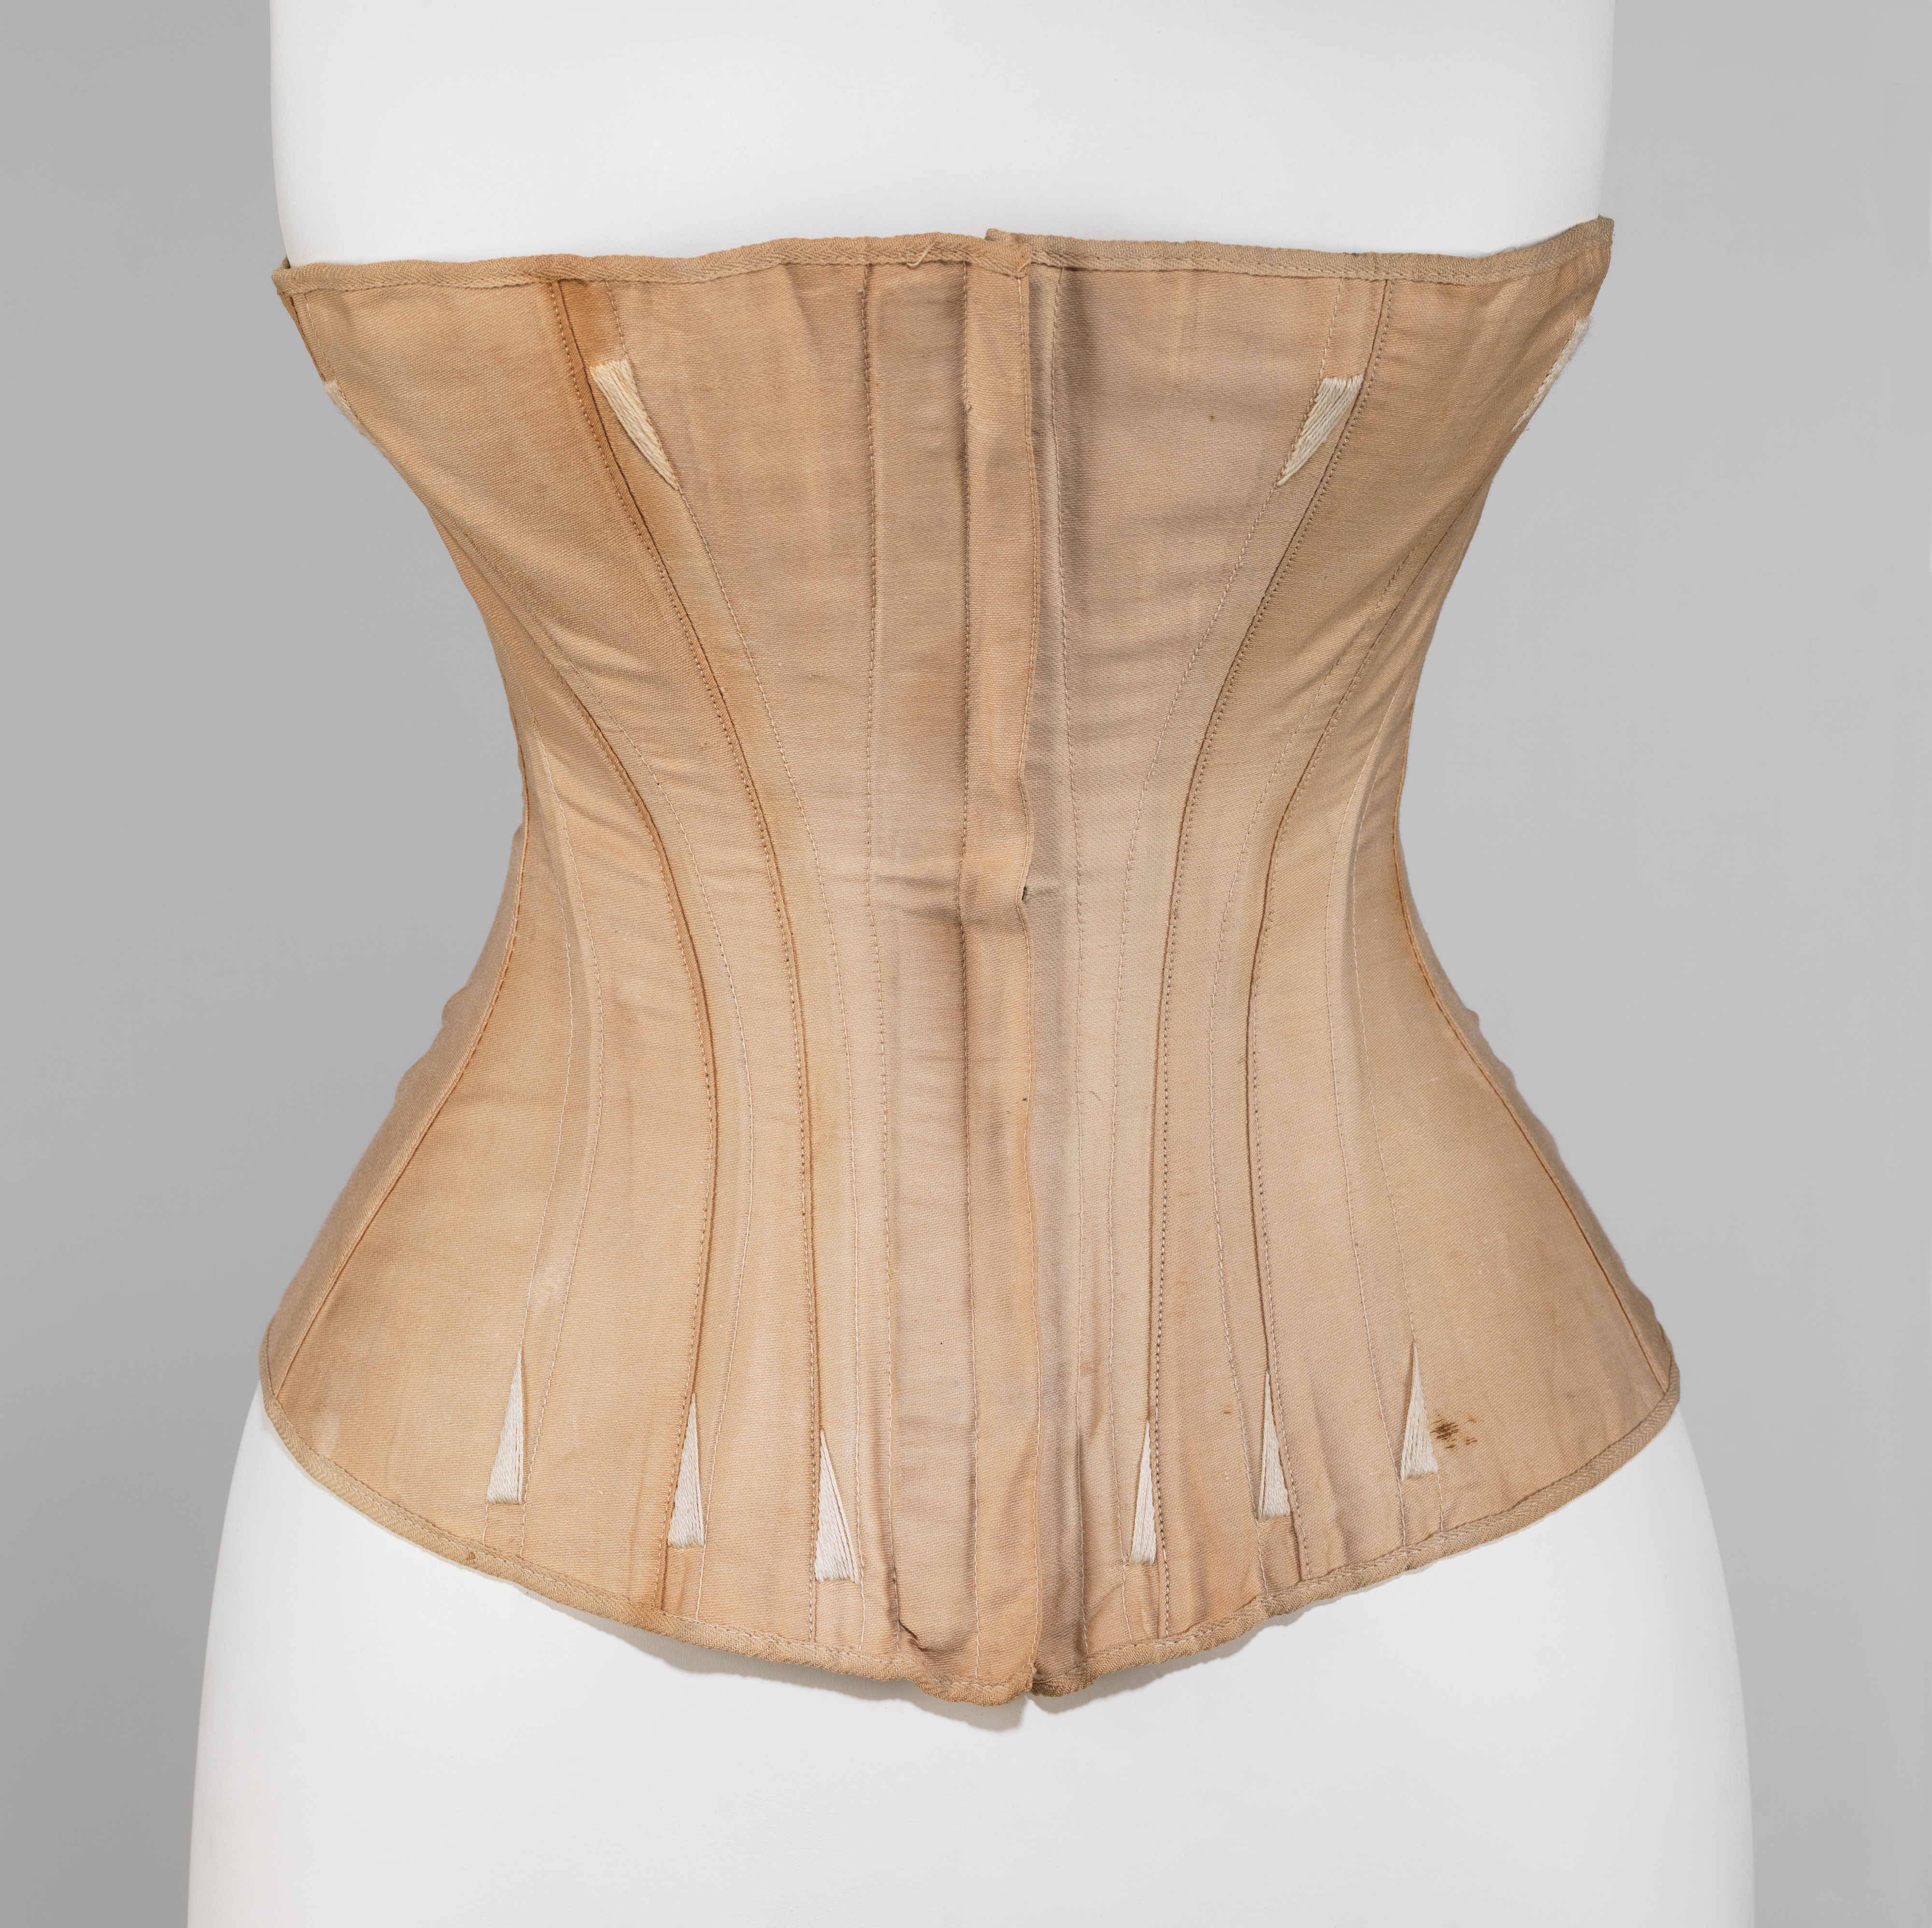 Worcester Skirt Company, Corset, American